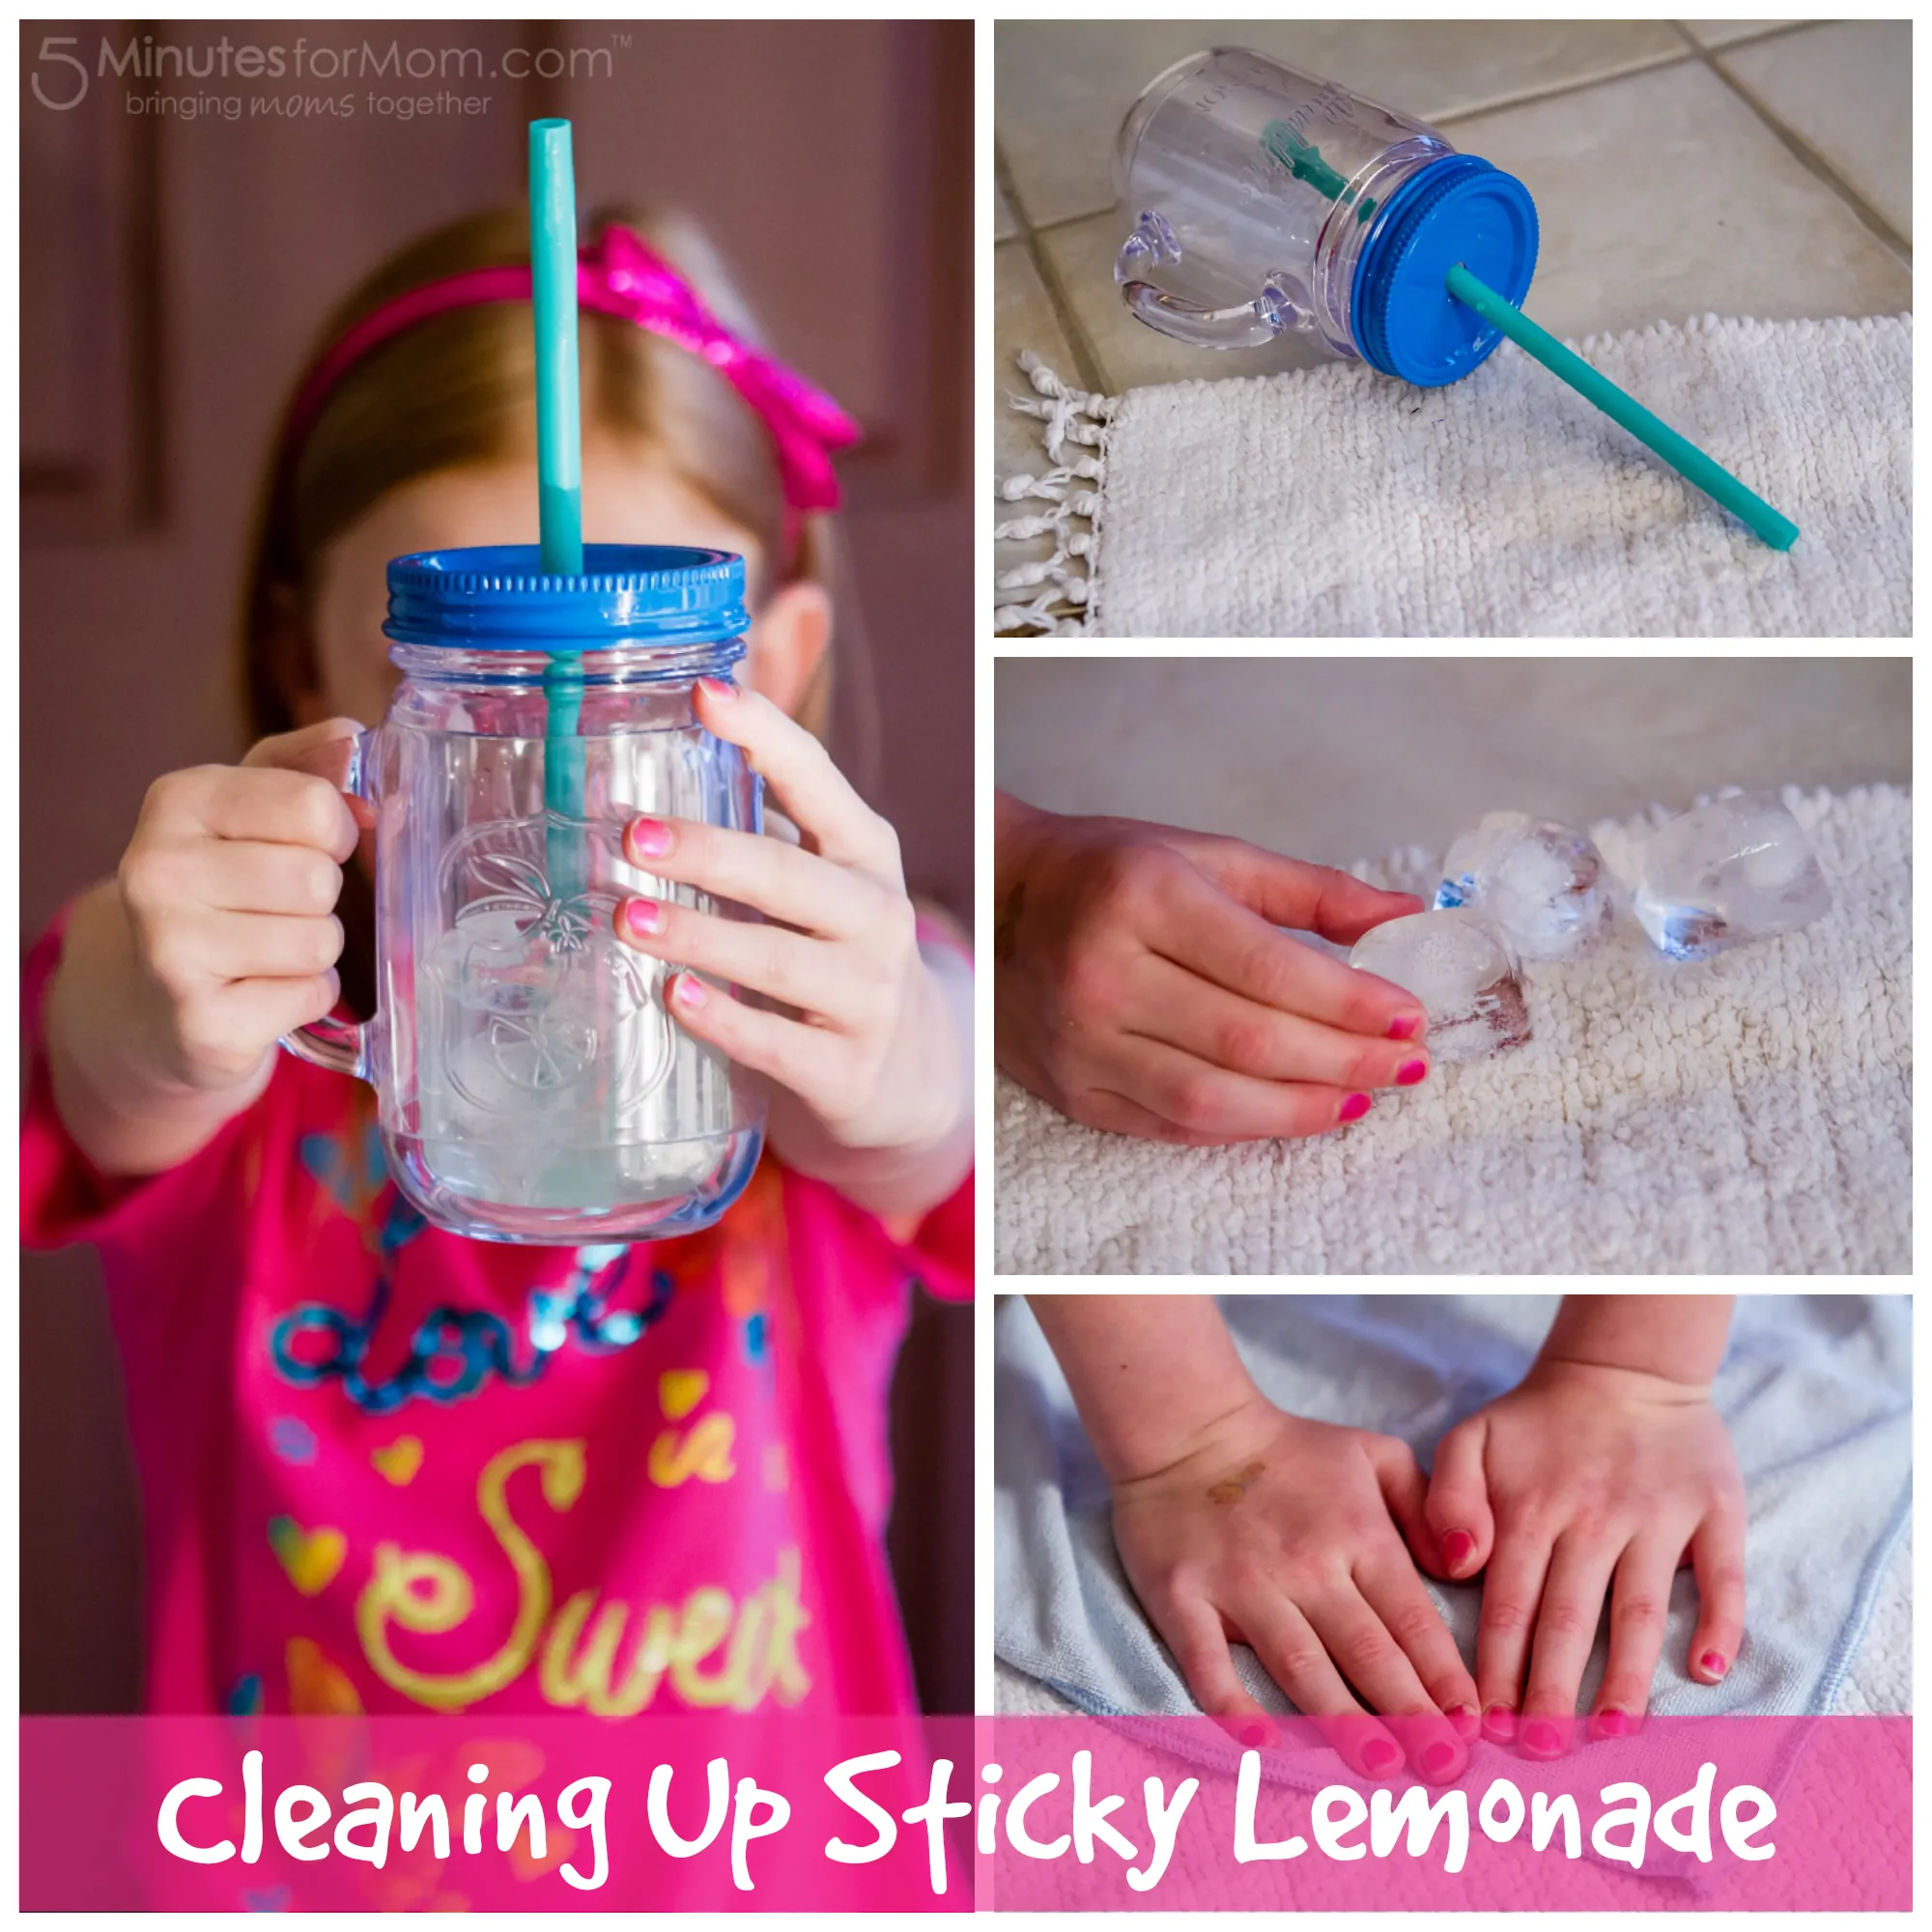 Cleaning Up Sticky Lemonade